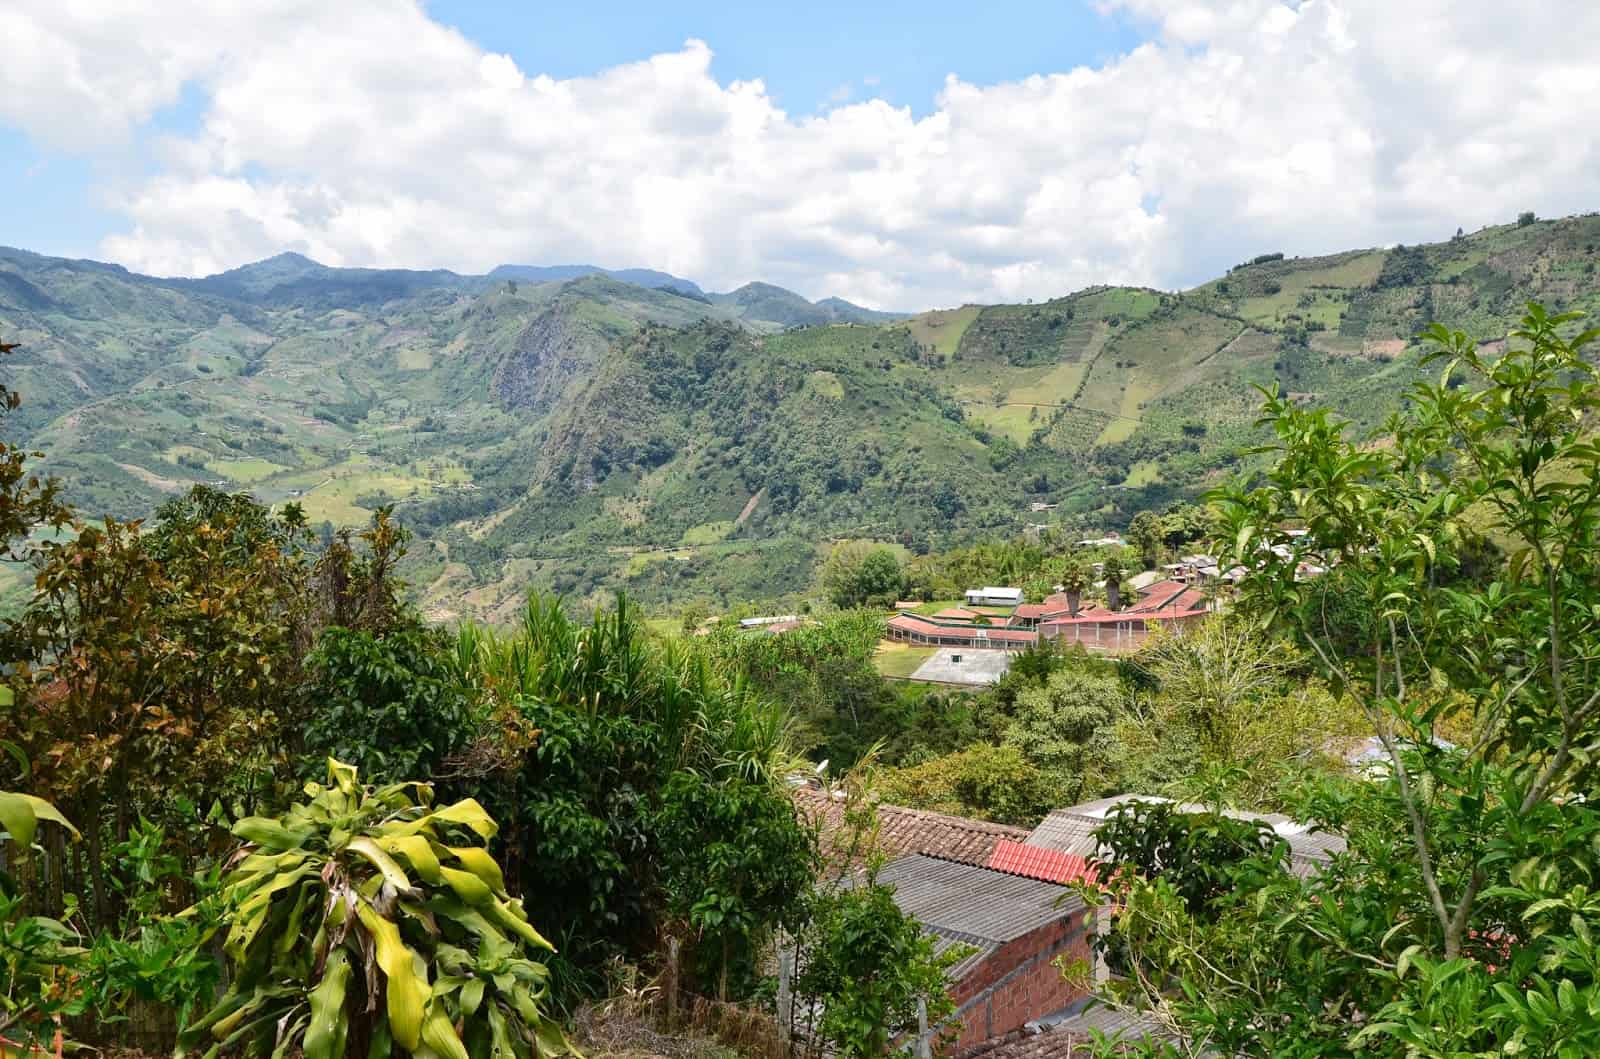 Looking towards the mountains in Guática, Risaralda, Colombia